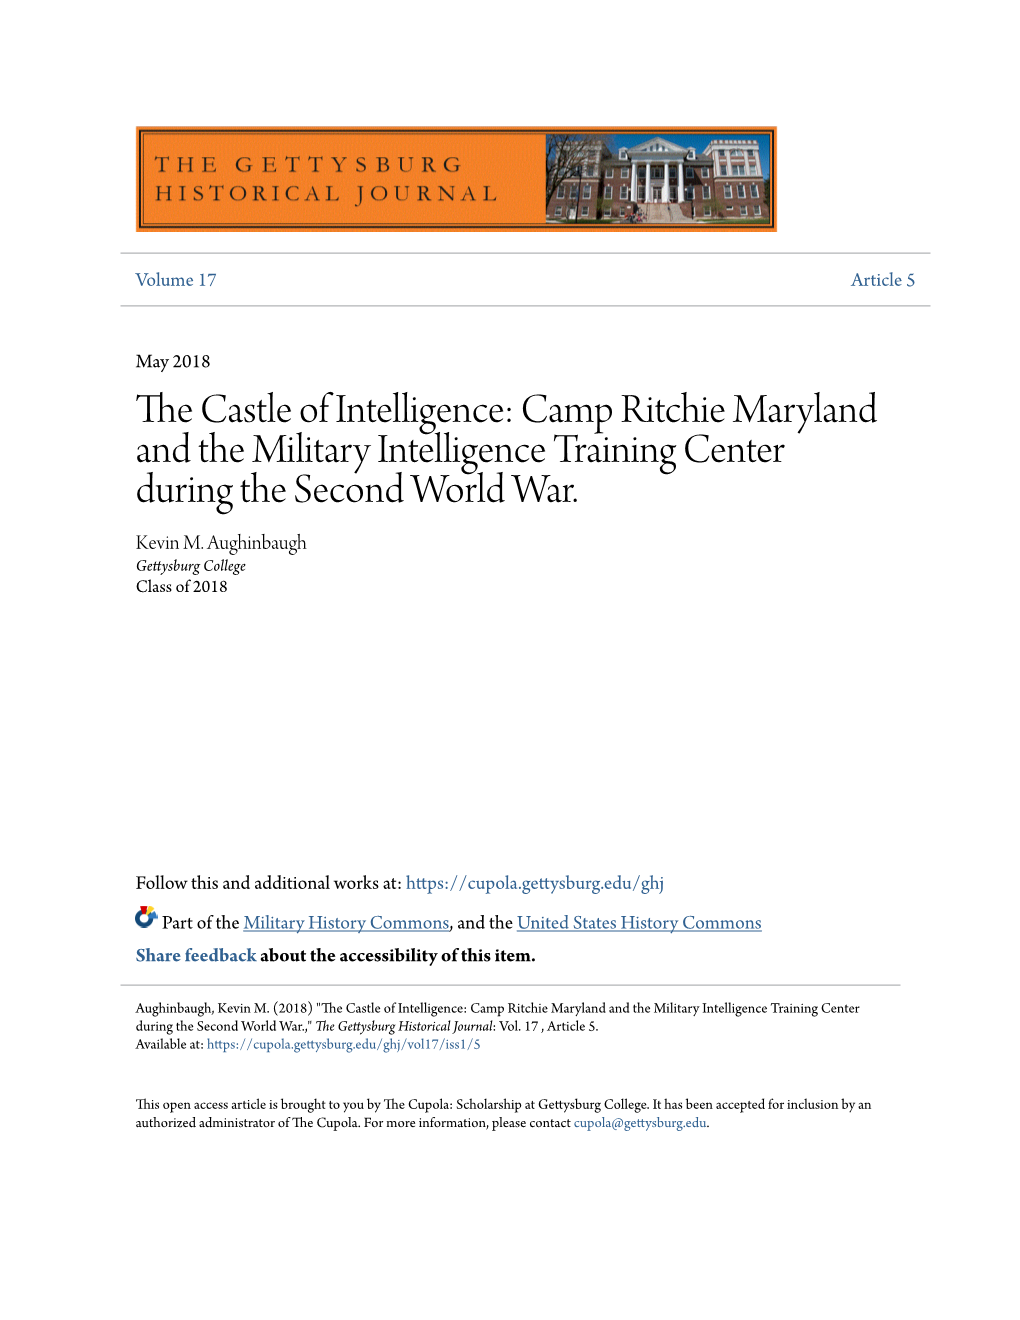 Camp Ritchie Maryland and the Military Intelligence Training Center During the Second World War